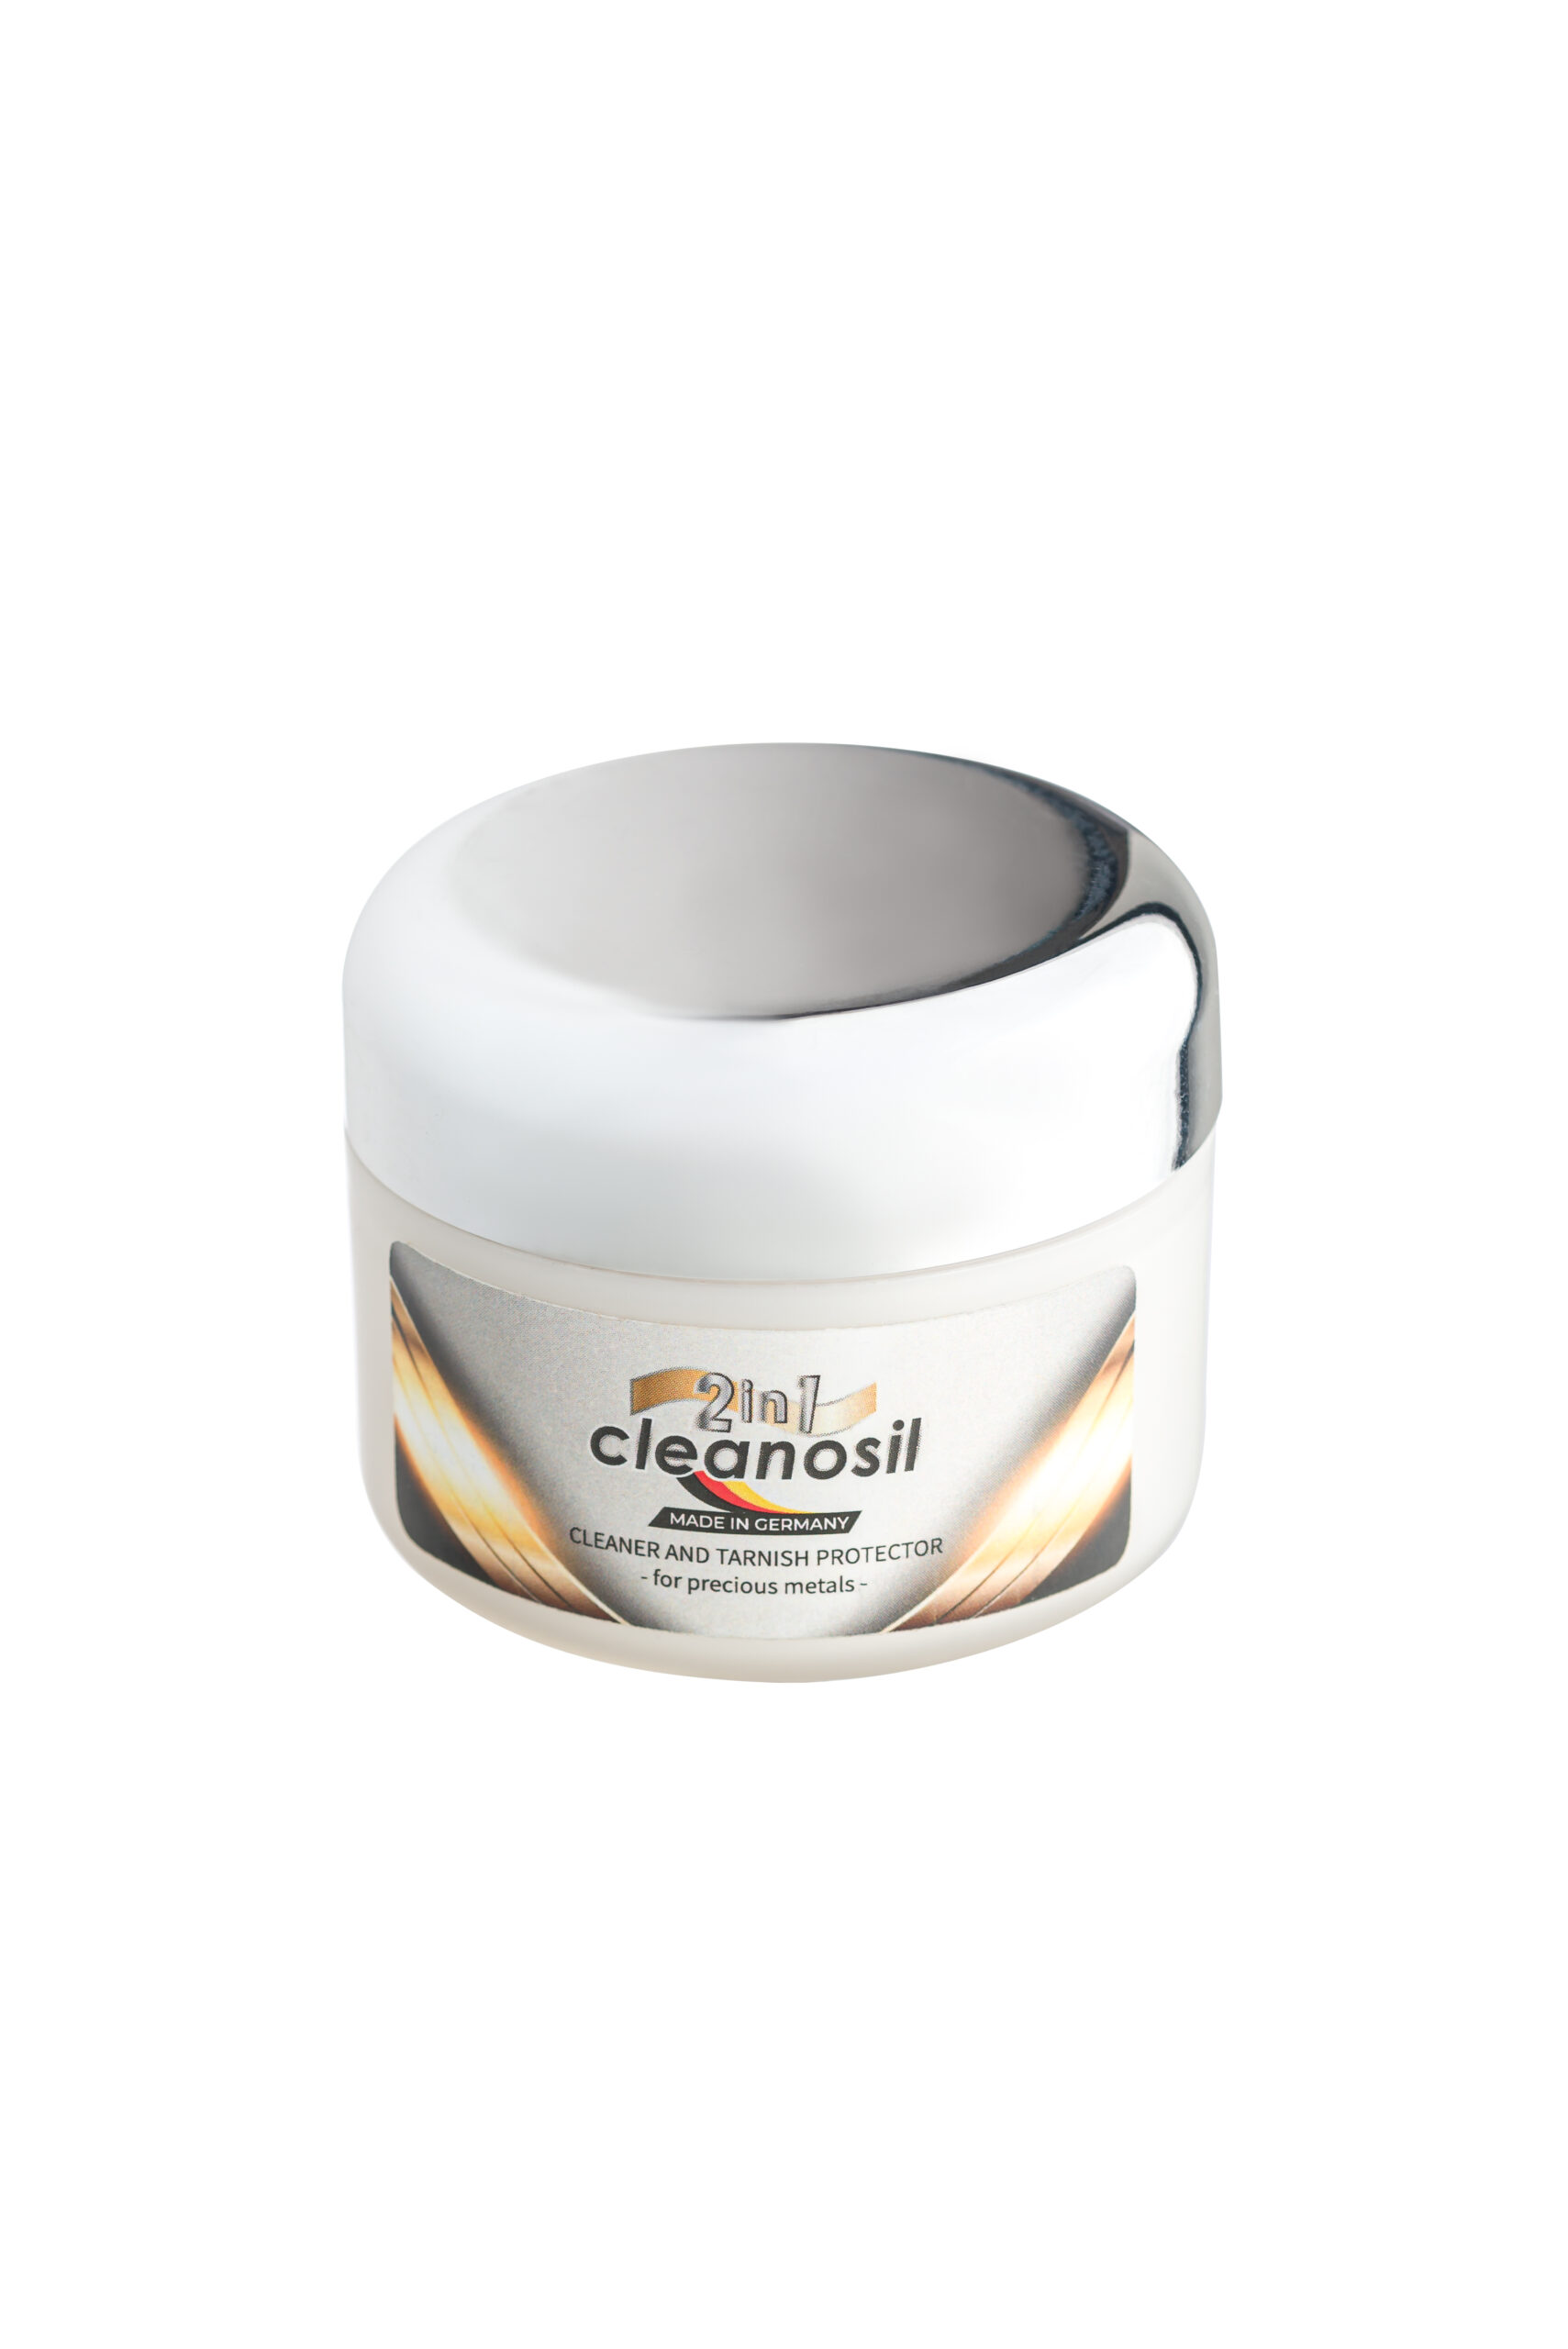 Cleanosil cream, protective system for silver surfaces